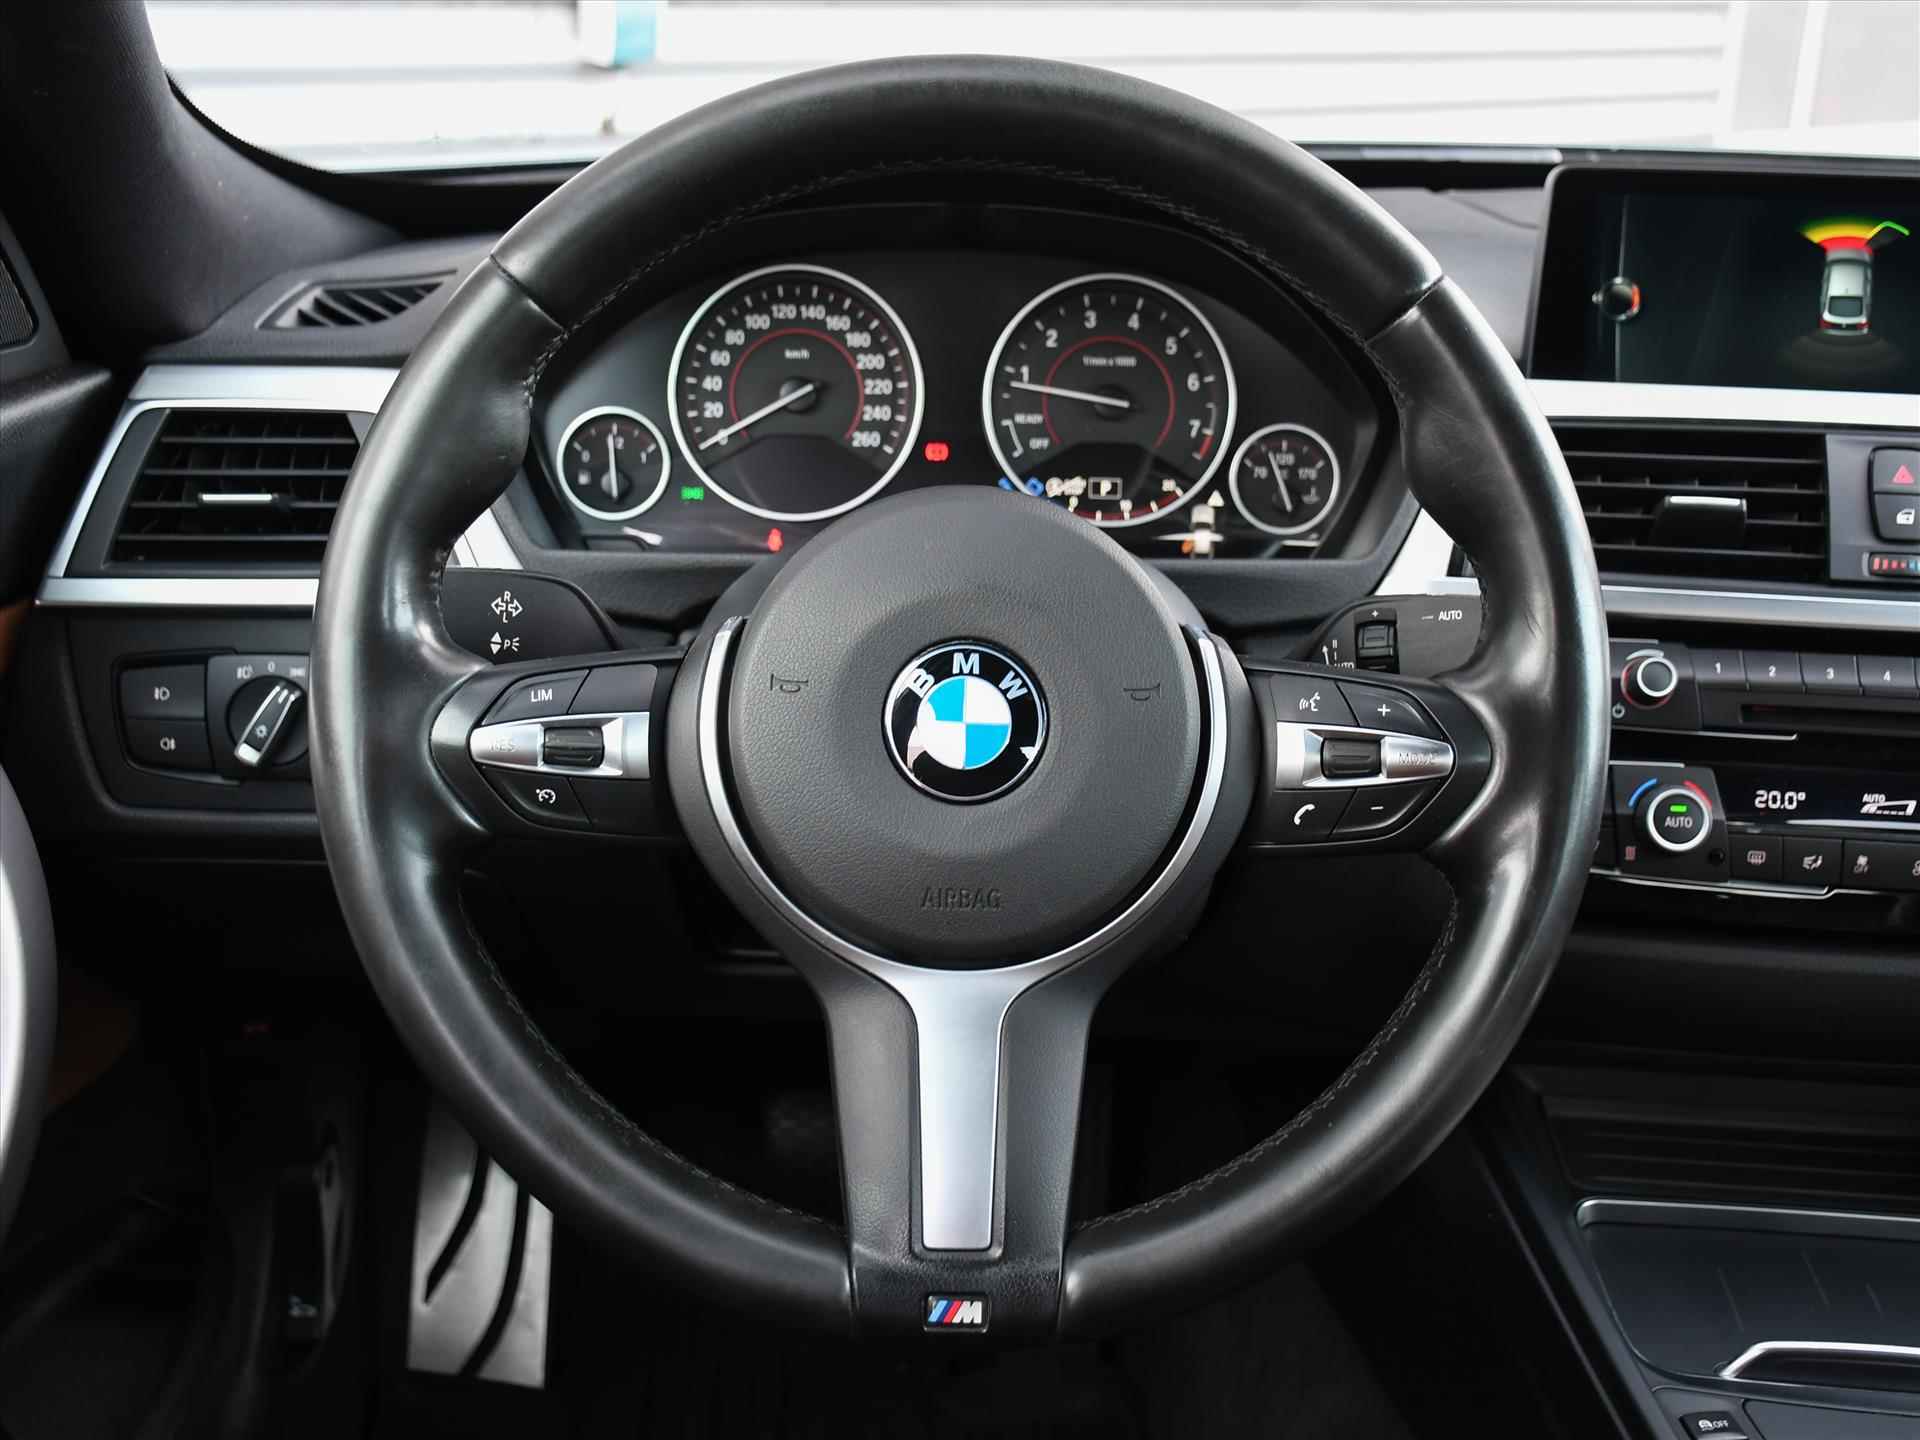 BMW 3-Serie Gran Turismo (f34) 320i High Executive XDrive 184pk Automaat CRUISE.C | PDC | LED | LEDER | 18''LM | NAVI | STOELVERW. VOOR - 14/34